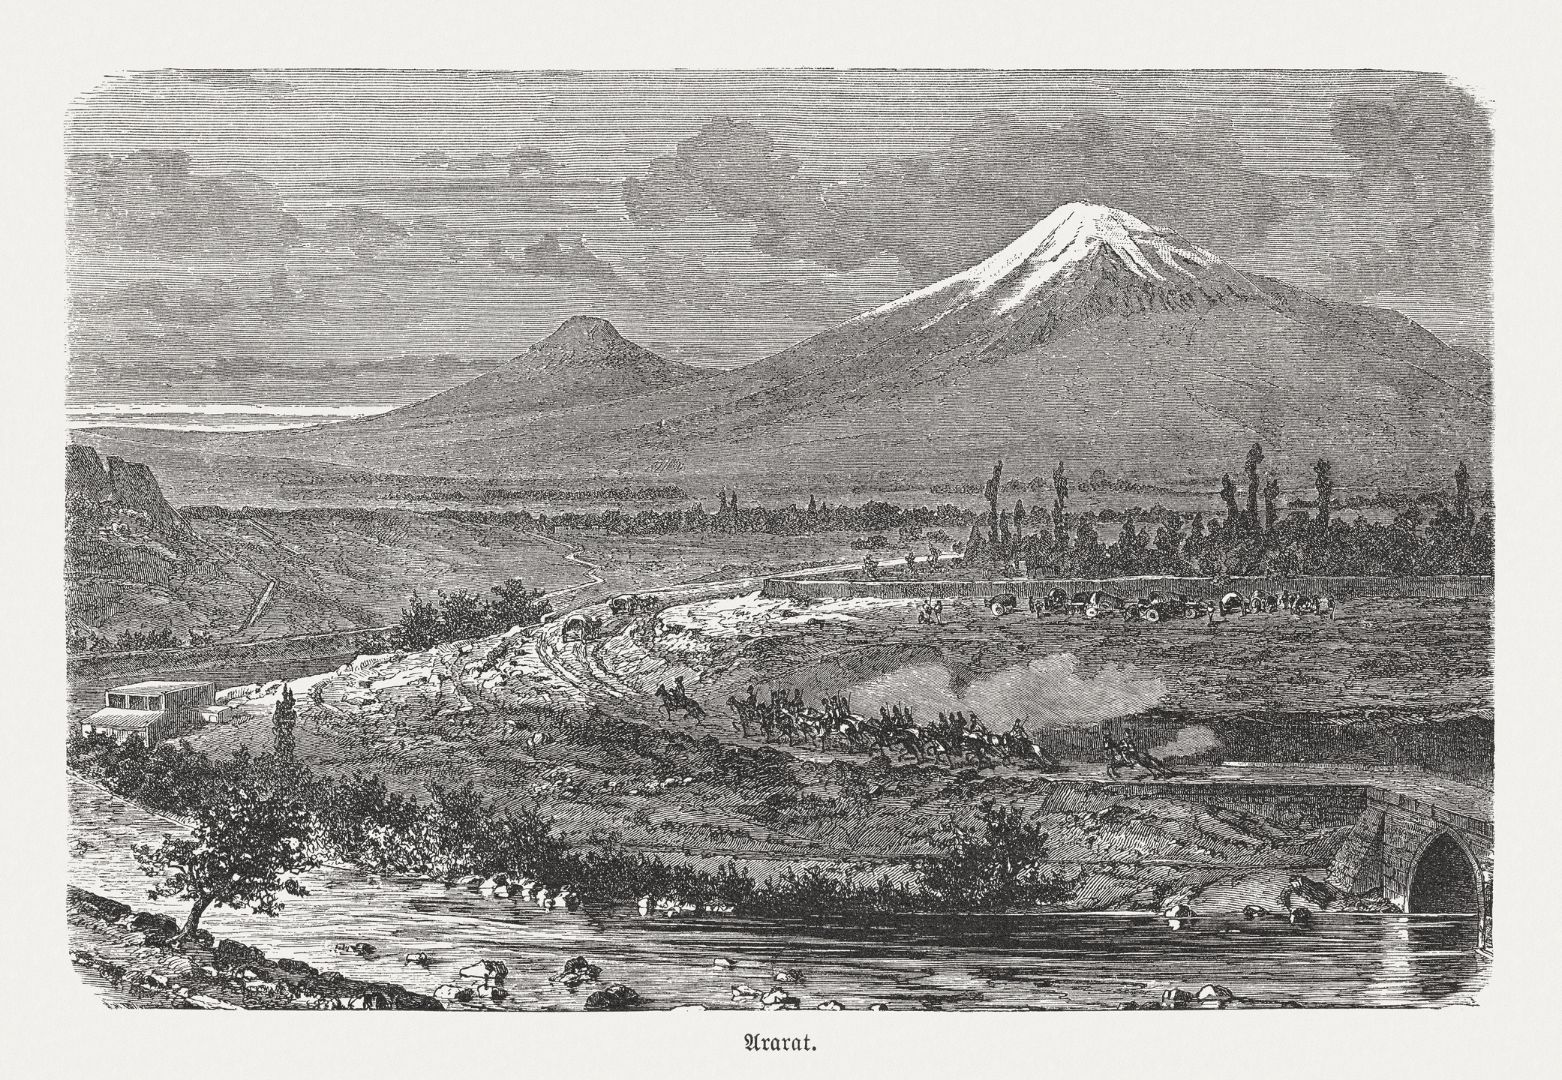 A wood engraving of Mount Ararat, published in 1893, and more accurate than many early illustrations